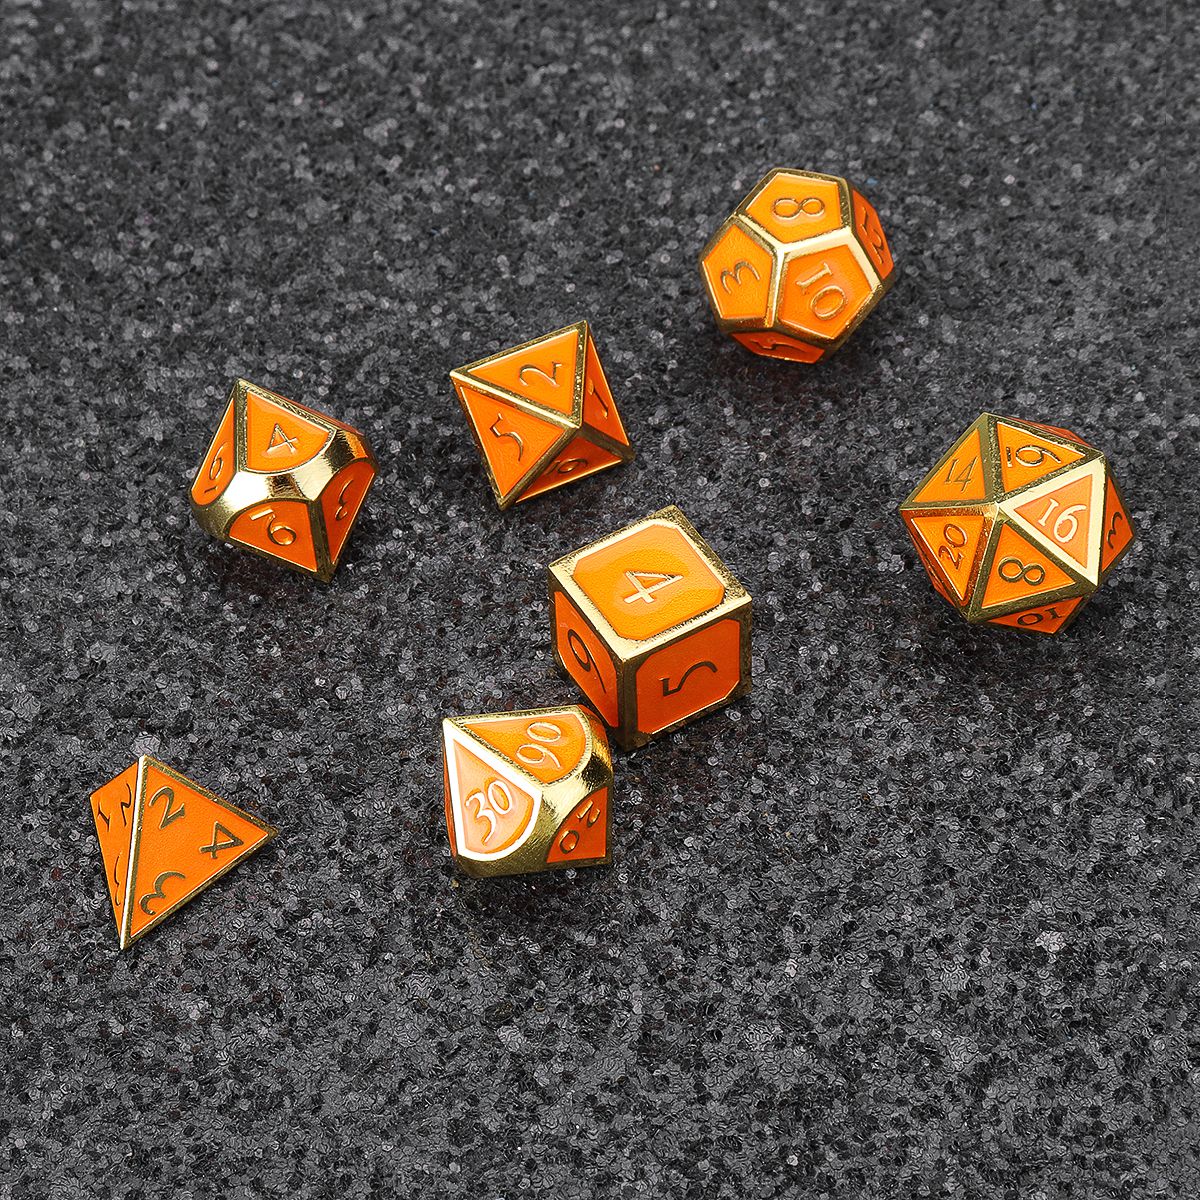 Solid-Metal-Heavy-Dice-Set-Polyhedral-Dices-Role-Playing-Games-Dice-Gadget-RPG-1391317